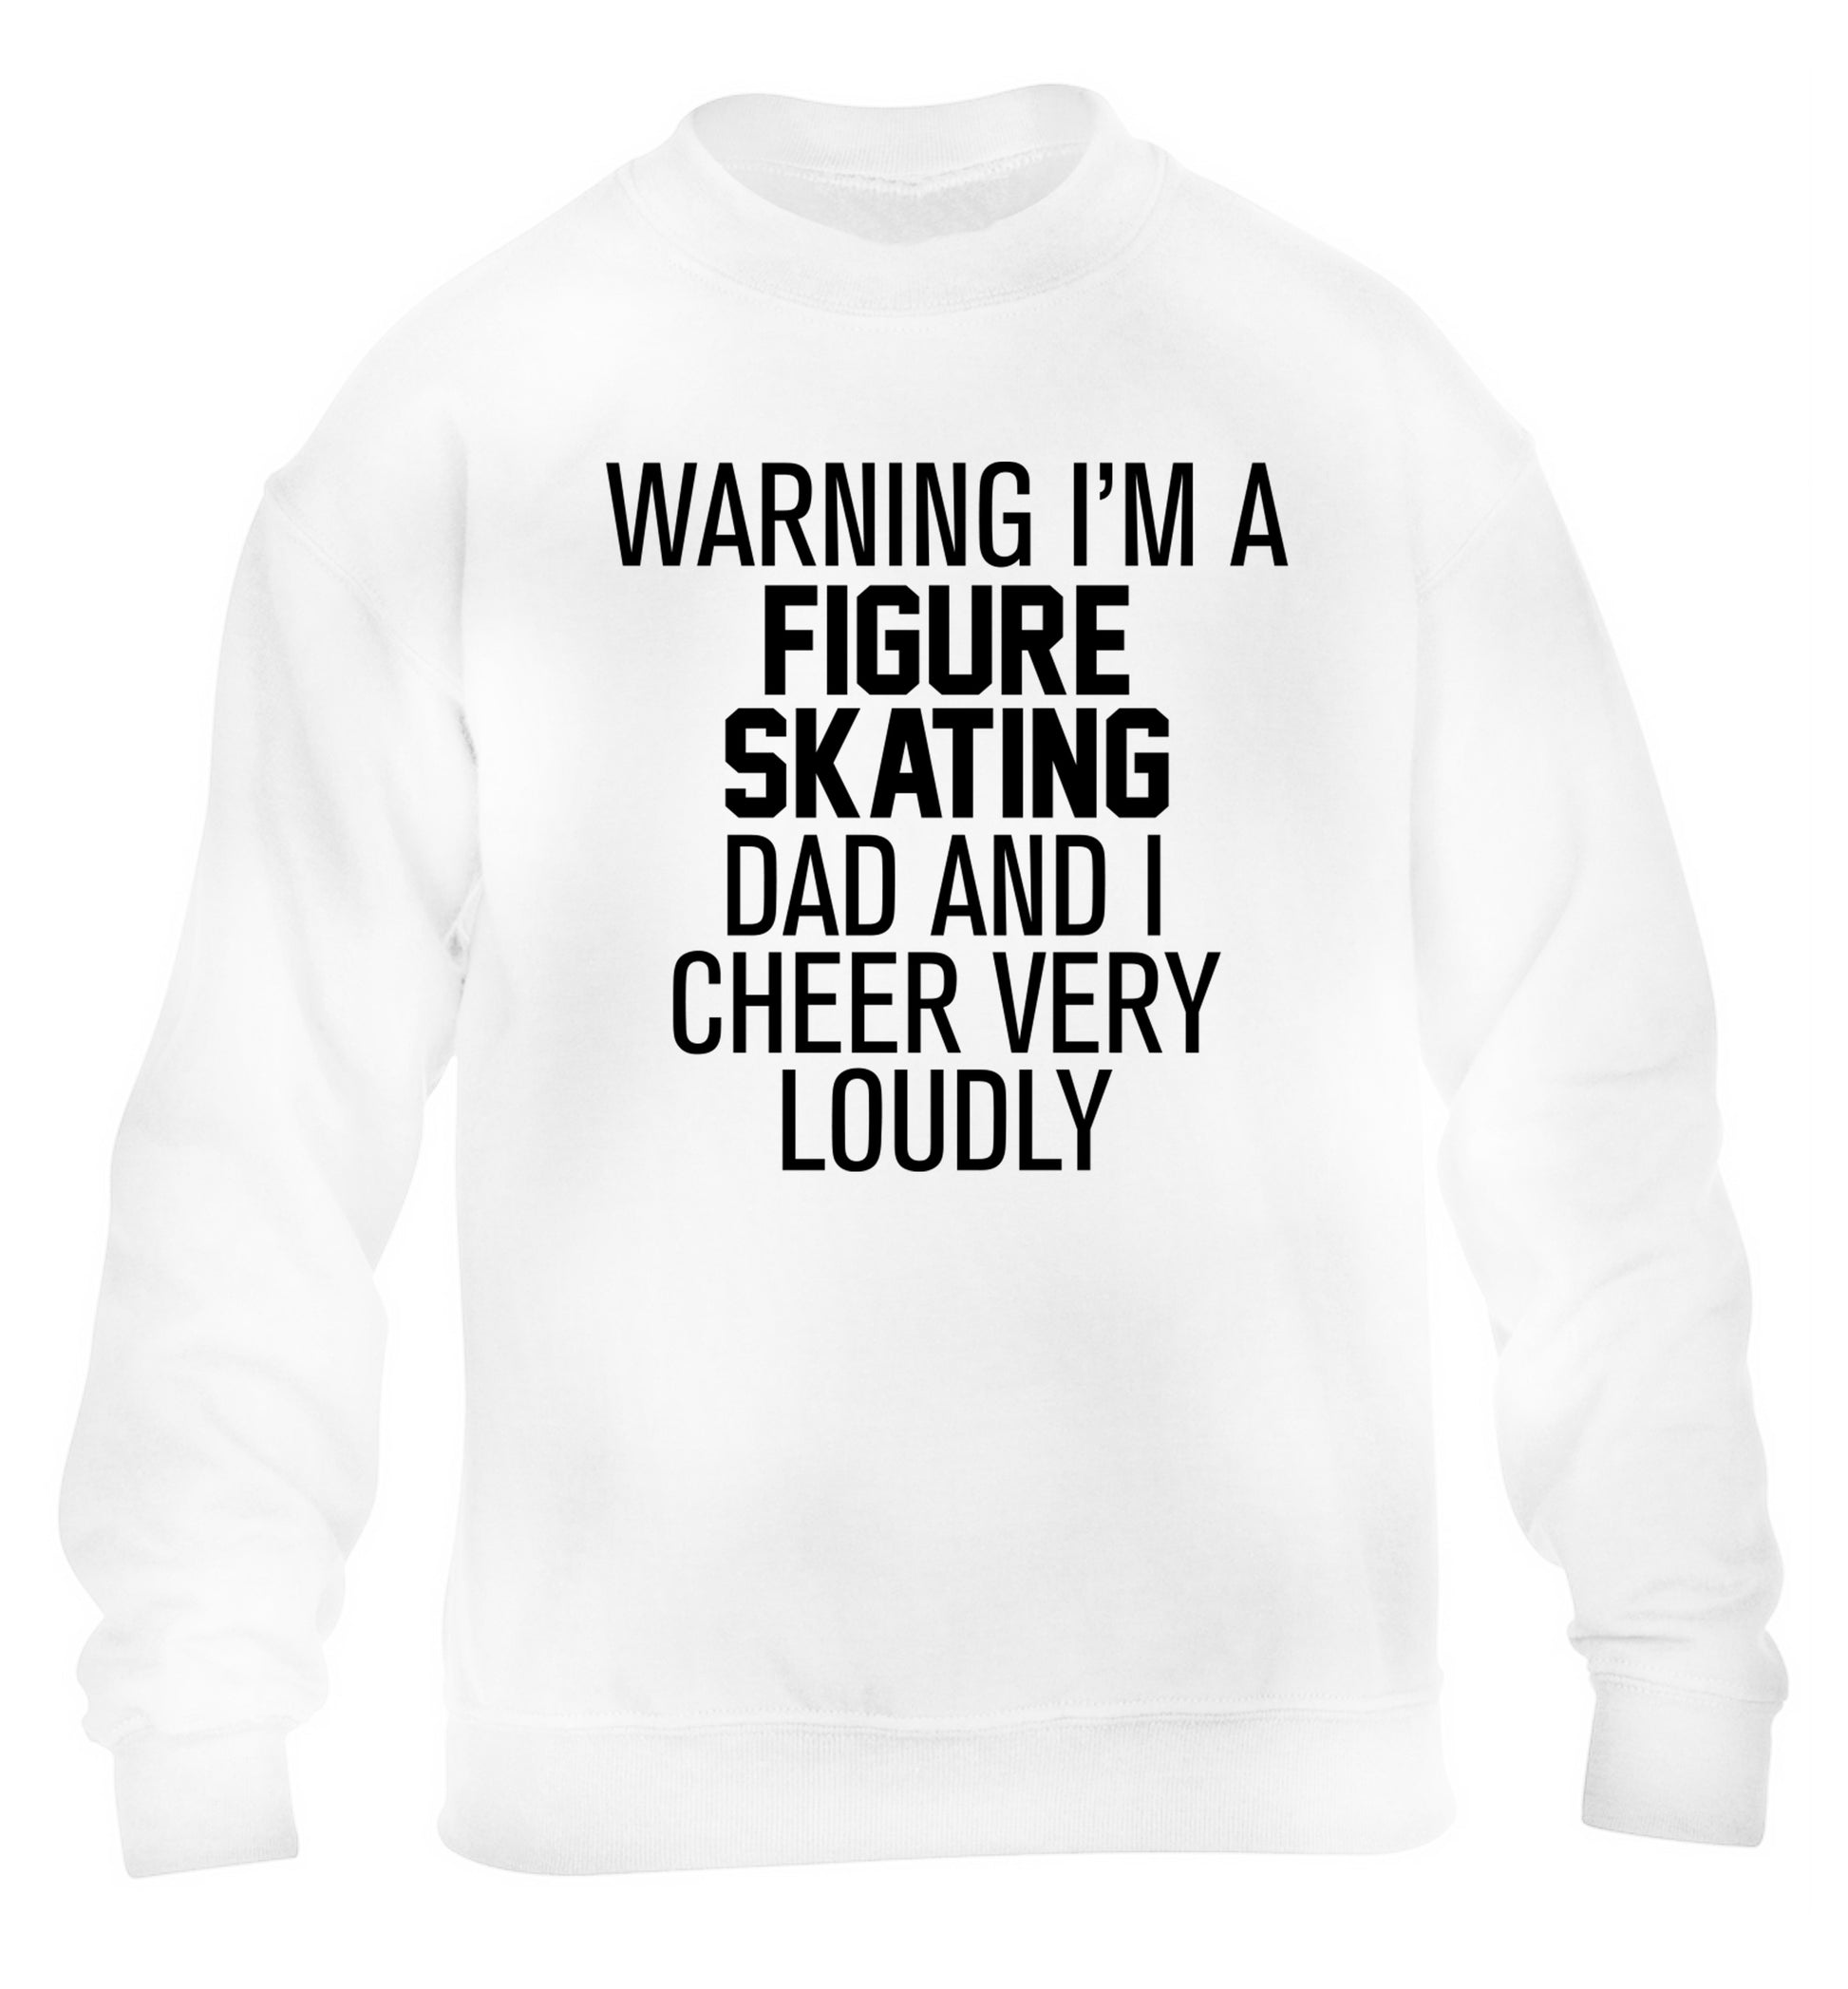 Warning I'm a figure skating dad and I cheer very loudly children's white sweater 12-14 Years